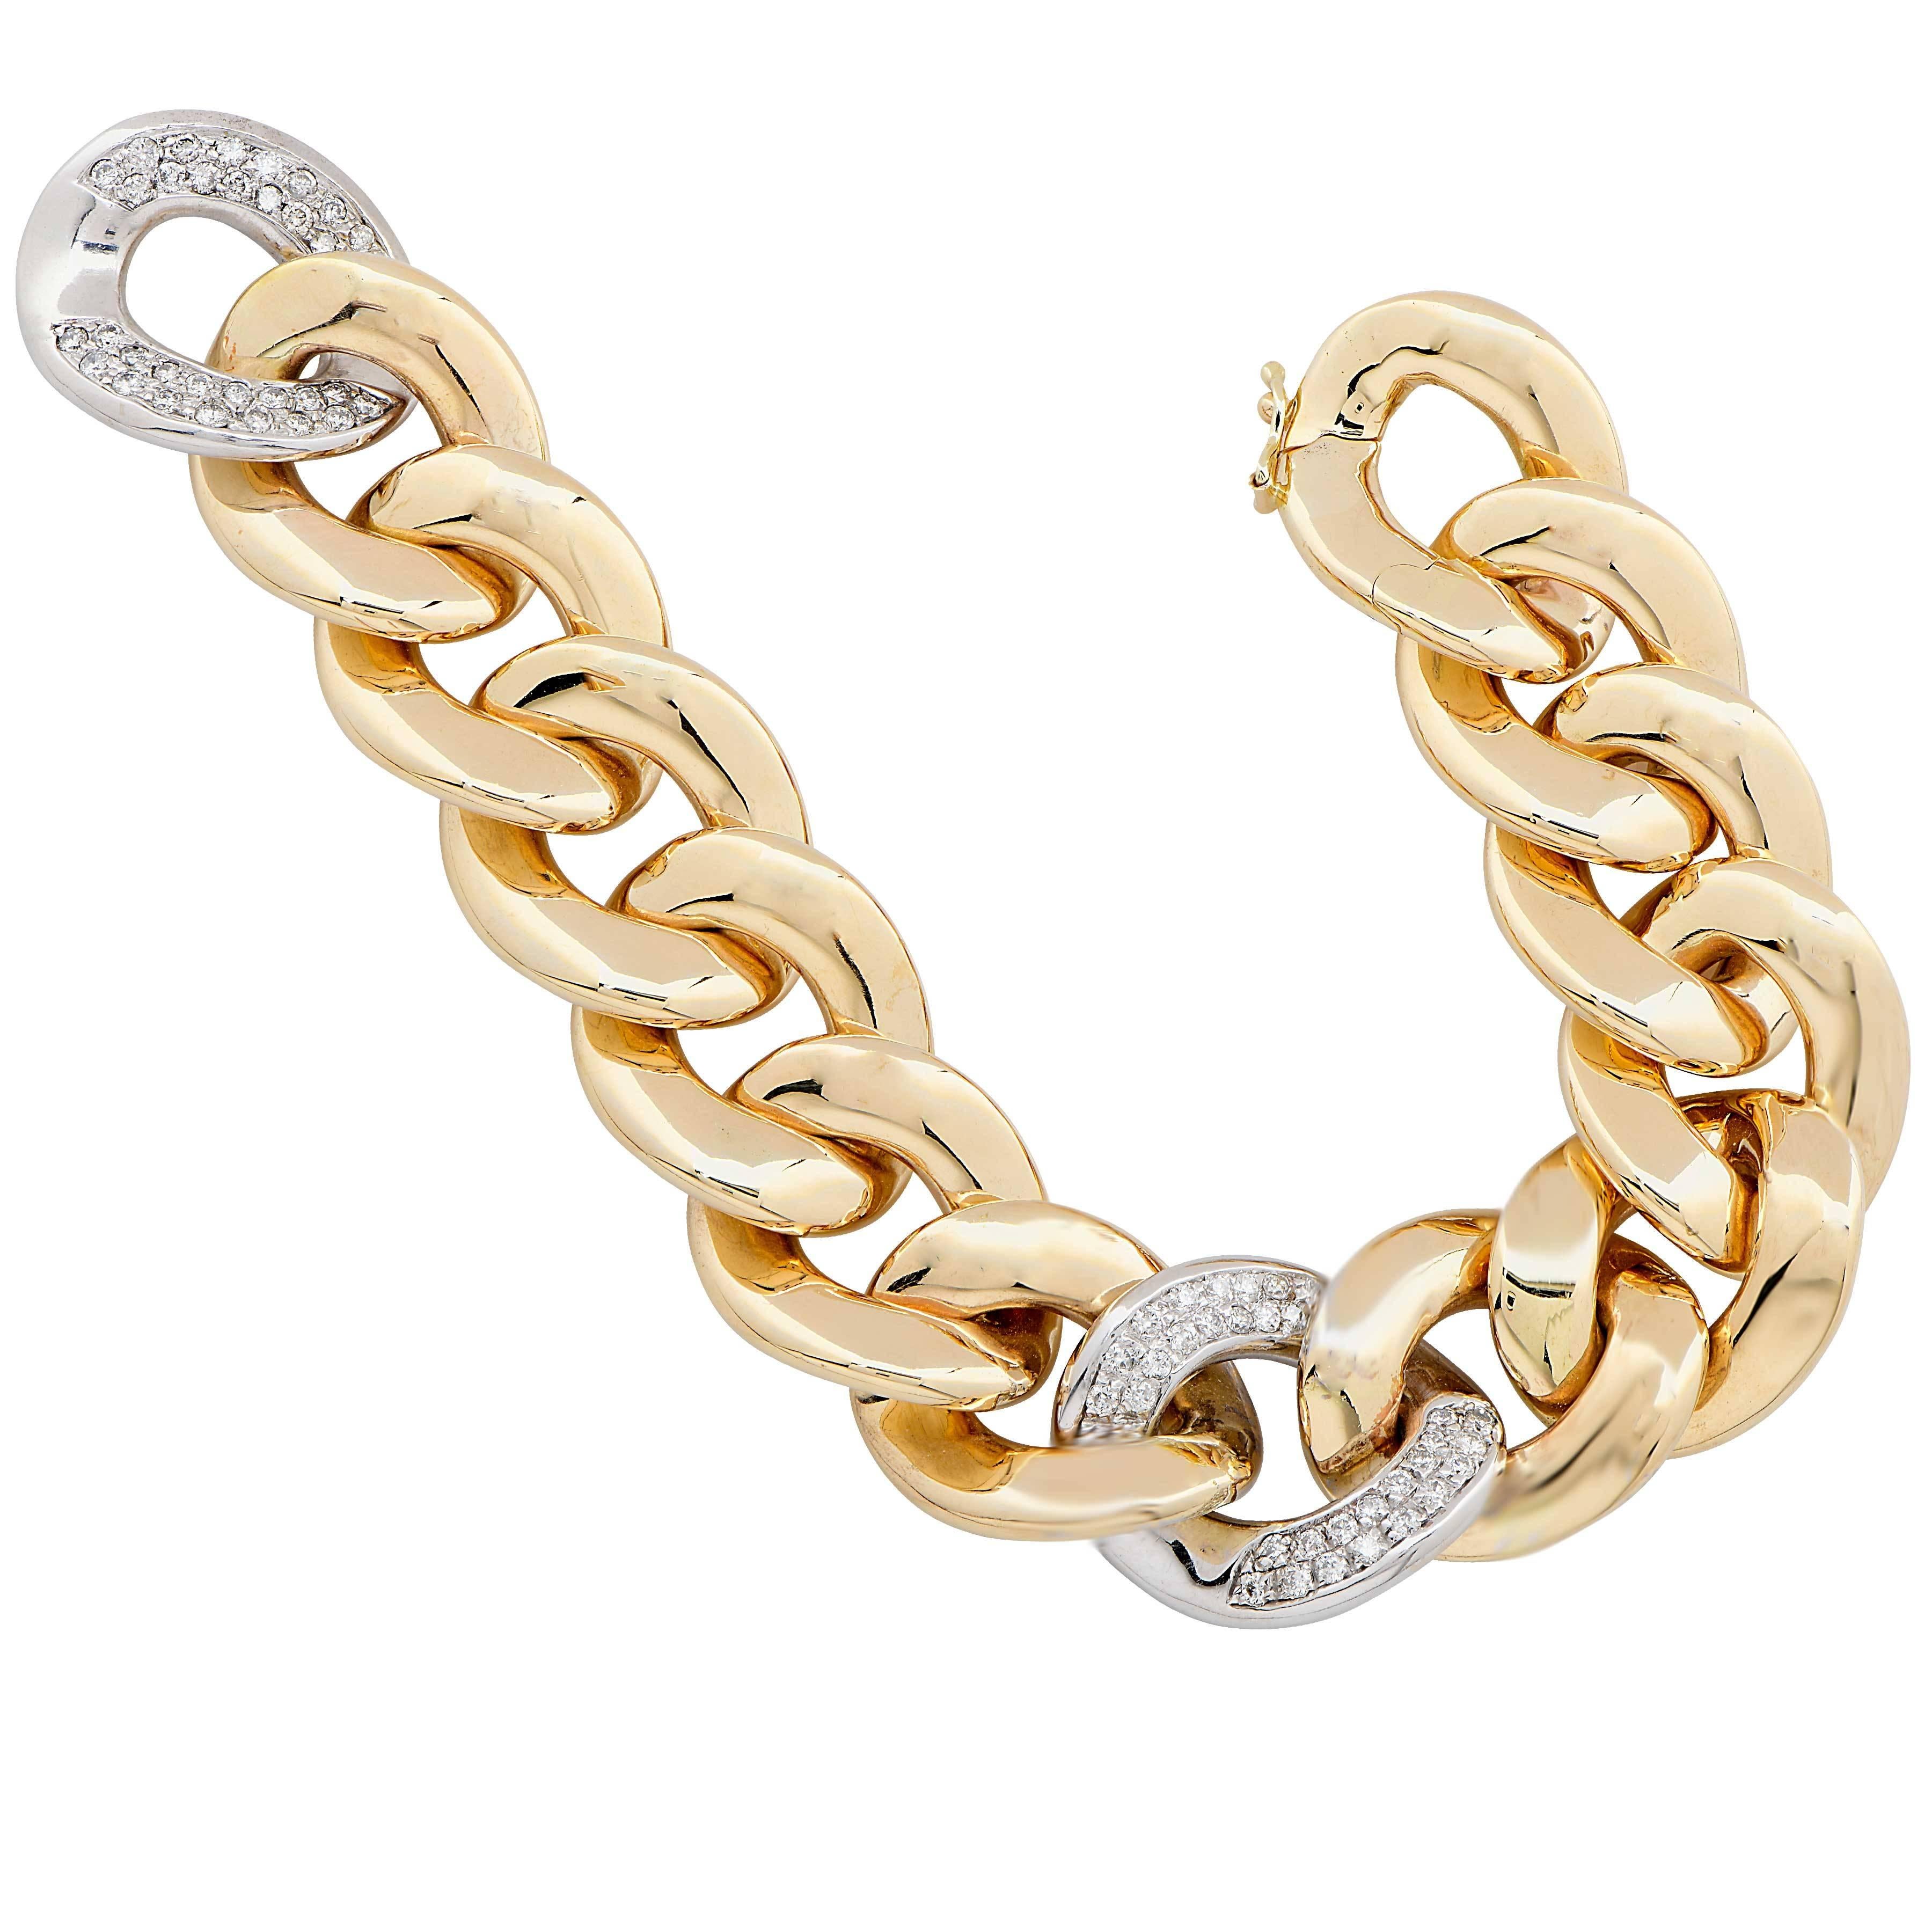 Yellow Gold Link Bracelet features 64 round brilliant cut diamonds with an estimated total weight of 1.70 carats.
Bracelet Length: 7.5 Inches
Metal Type: 14 Karat Yellow Gold
Metal Weight: 63.93 Grams